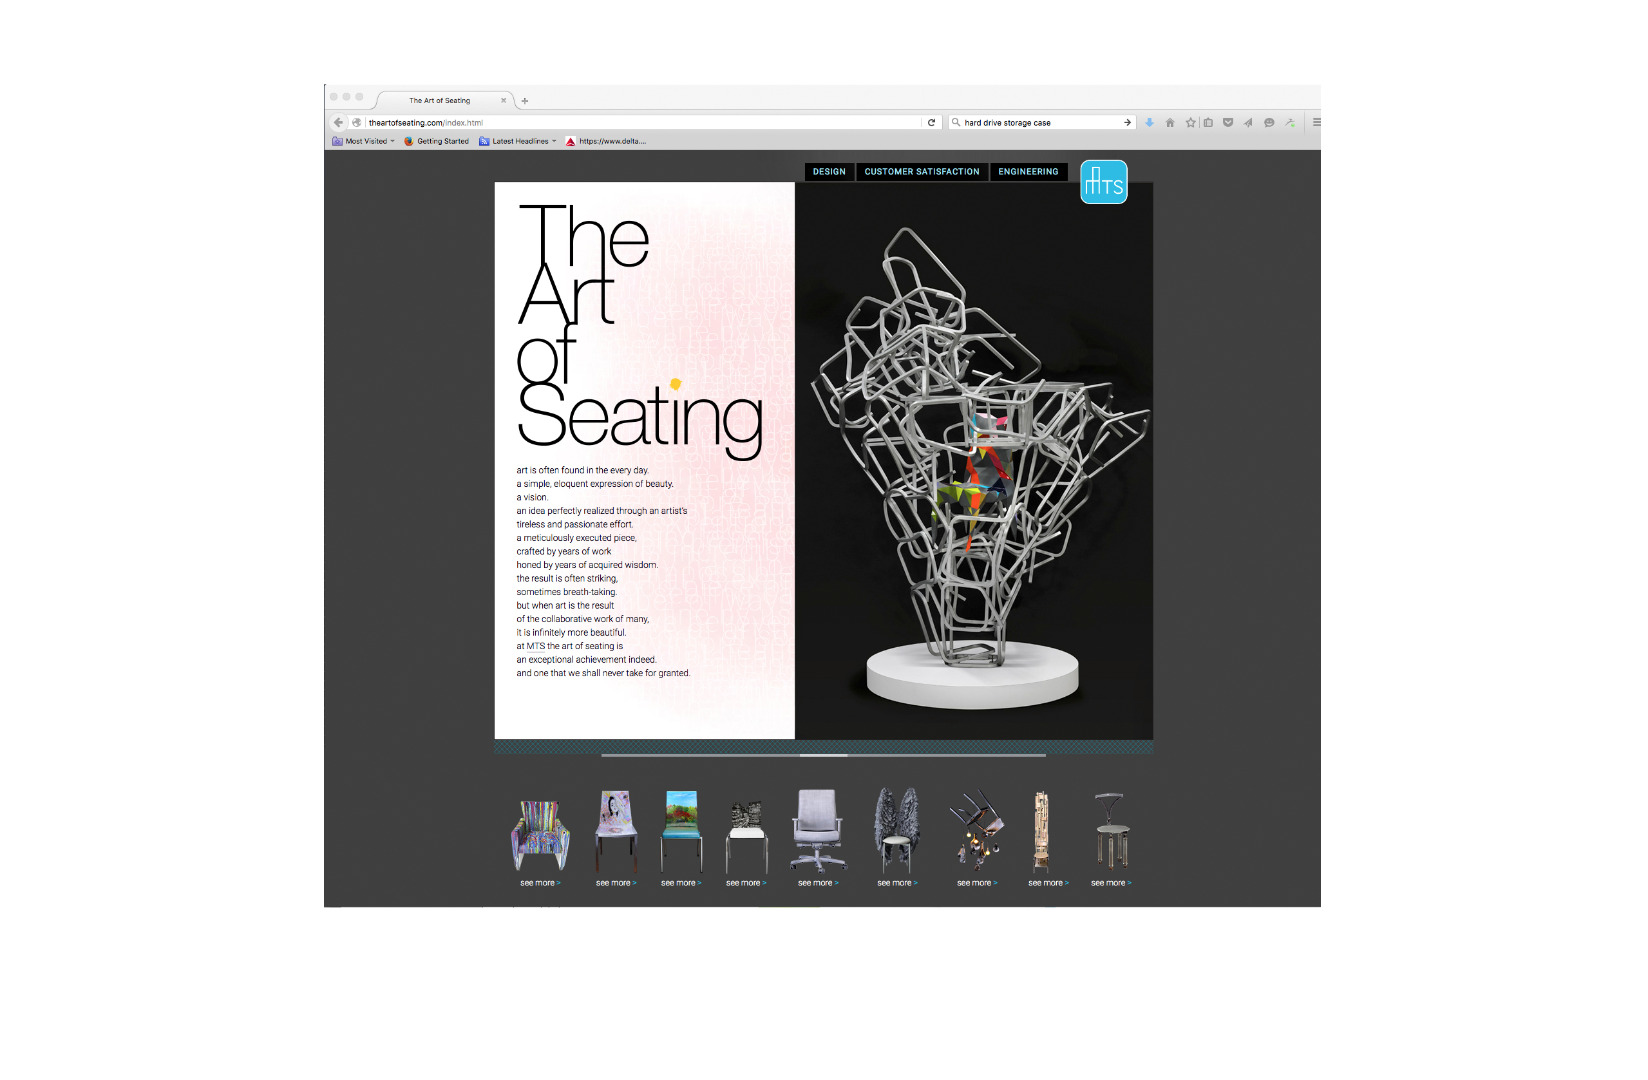 The Art of Seating Website (Click below to view)